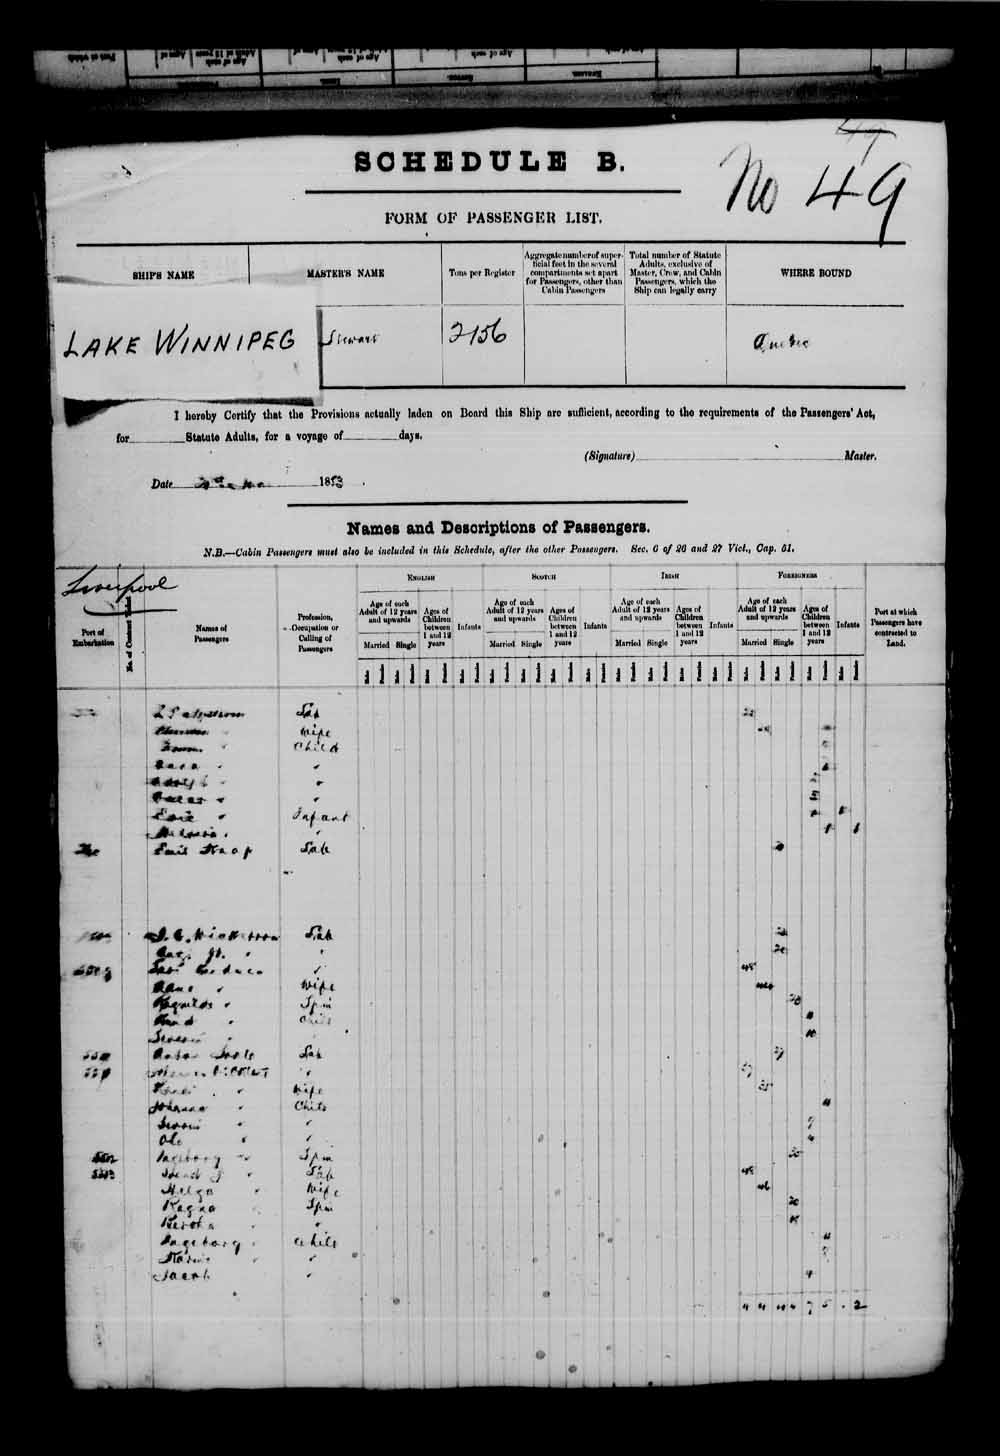 Digitized page of Passenger Lists for Image No.: e003543401